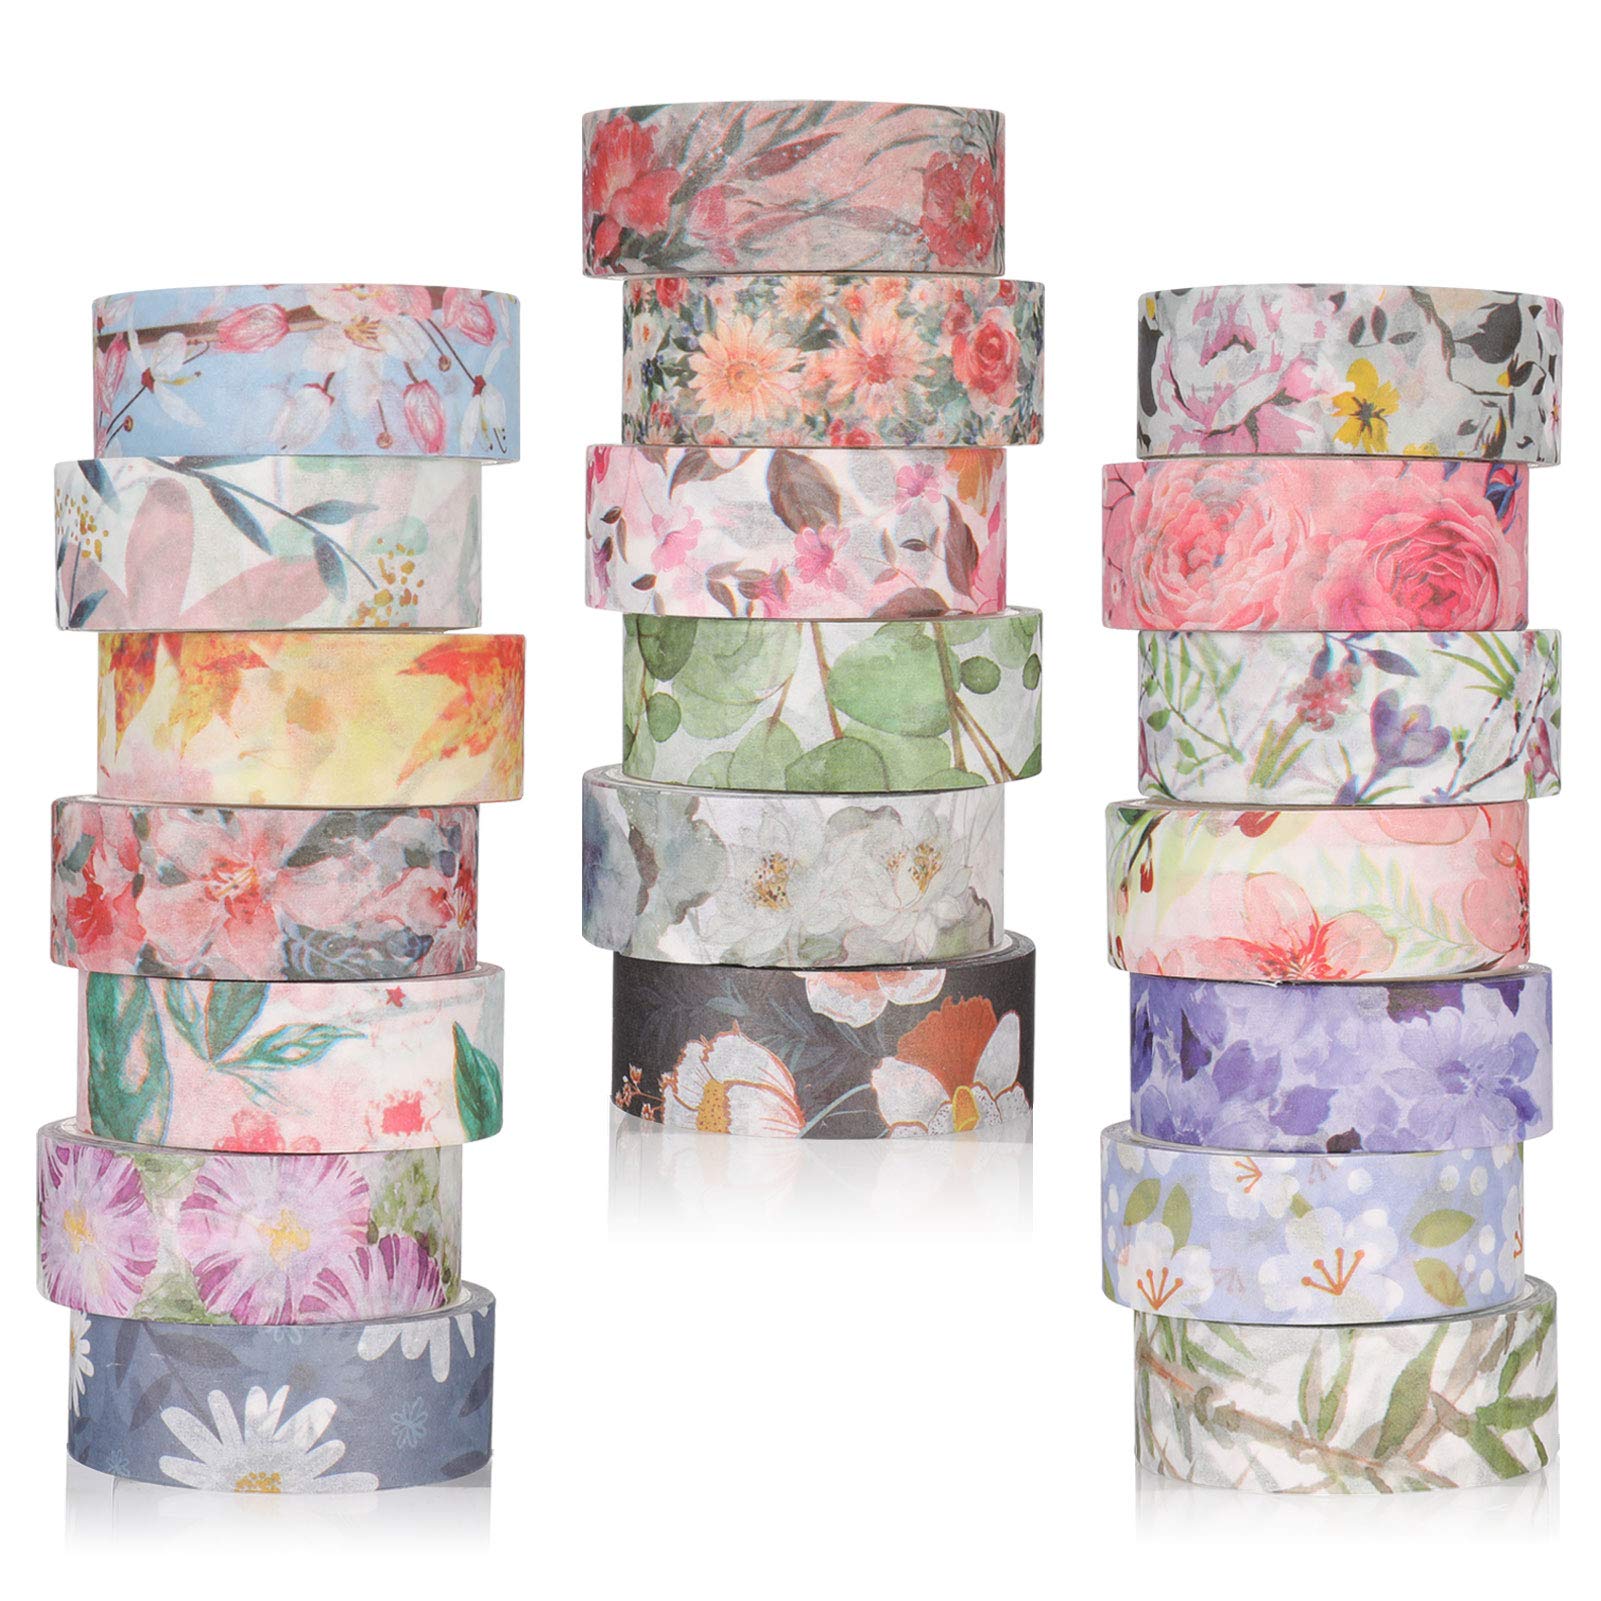 QTY OF ASSORTED ITEMS TO INCLUDE JOELELI 20 ROLLS WASHI TAPE SET FLORAL MASKING WASHI TAPE, DECORATIVE MULTI-PATTERN WASHI TAPE FOR DIY CRAFT GIFT WRAPPING FESTIVALS DECORATION SCRAPBOOKING: LOCATION